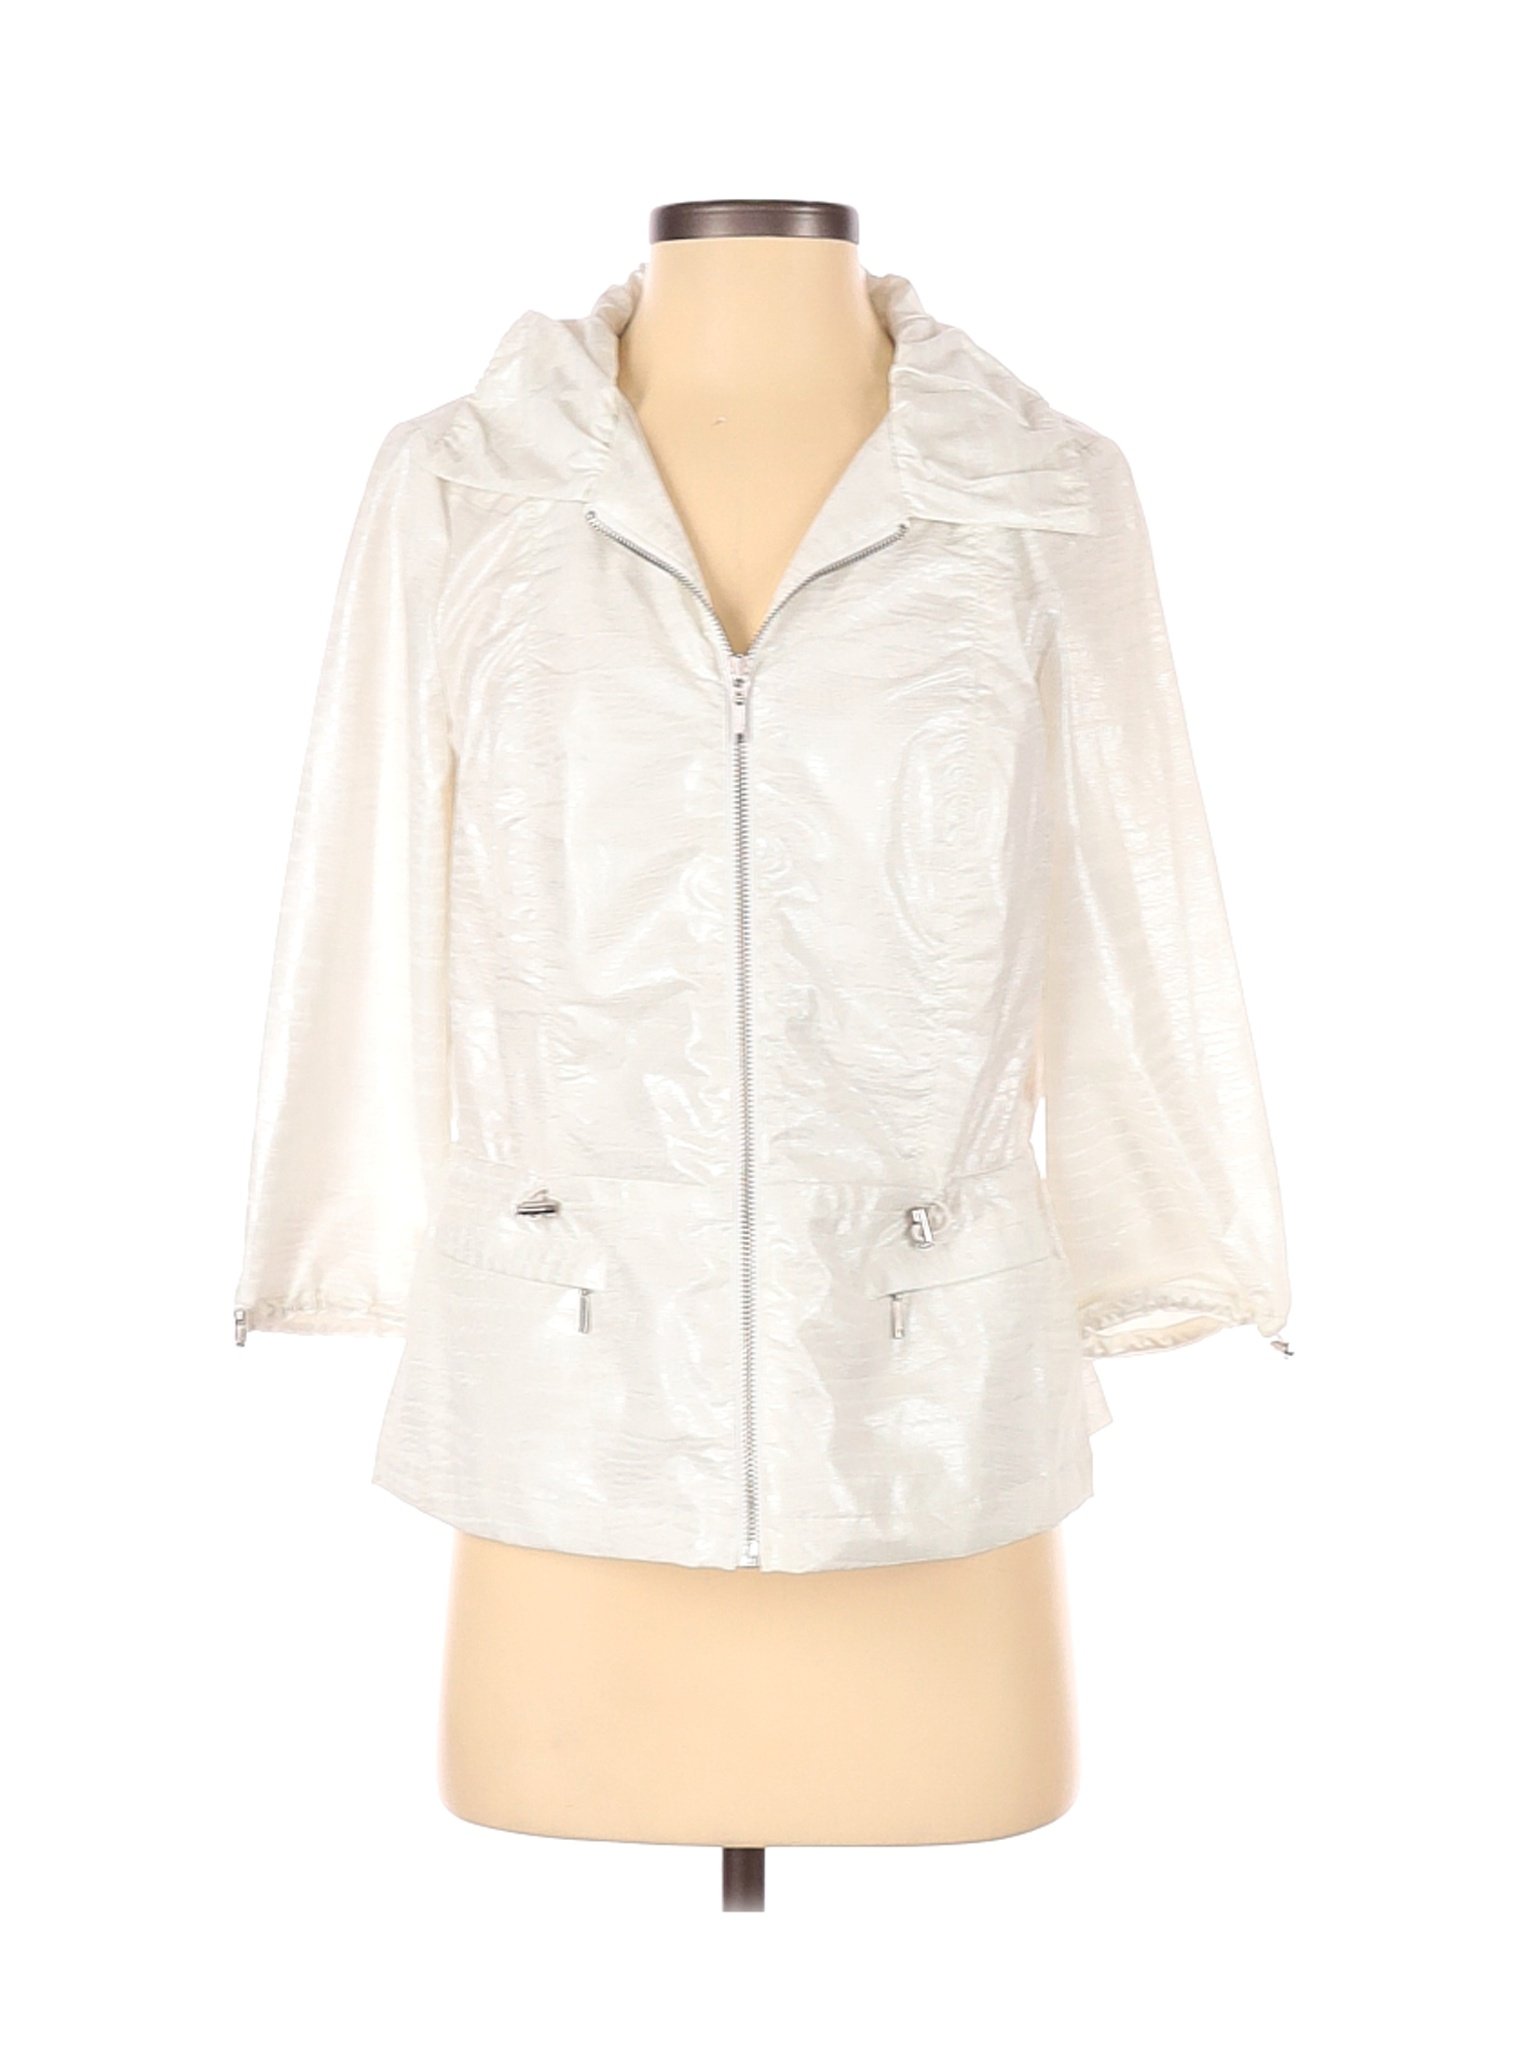 Zenergy by Chico's Solid White Jacket Size Sm (0) - 86% off | thredUP